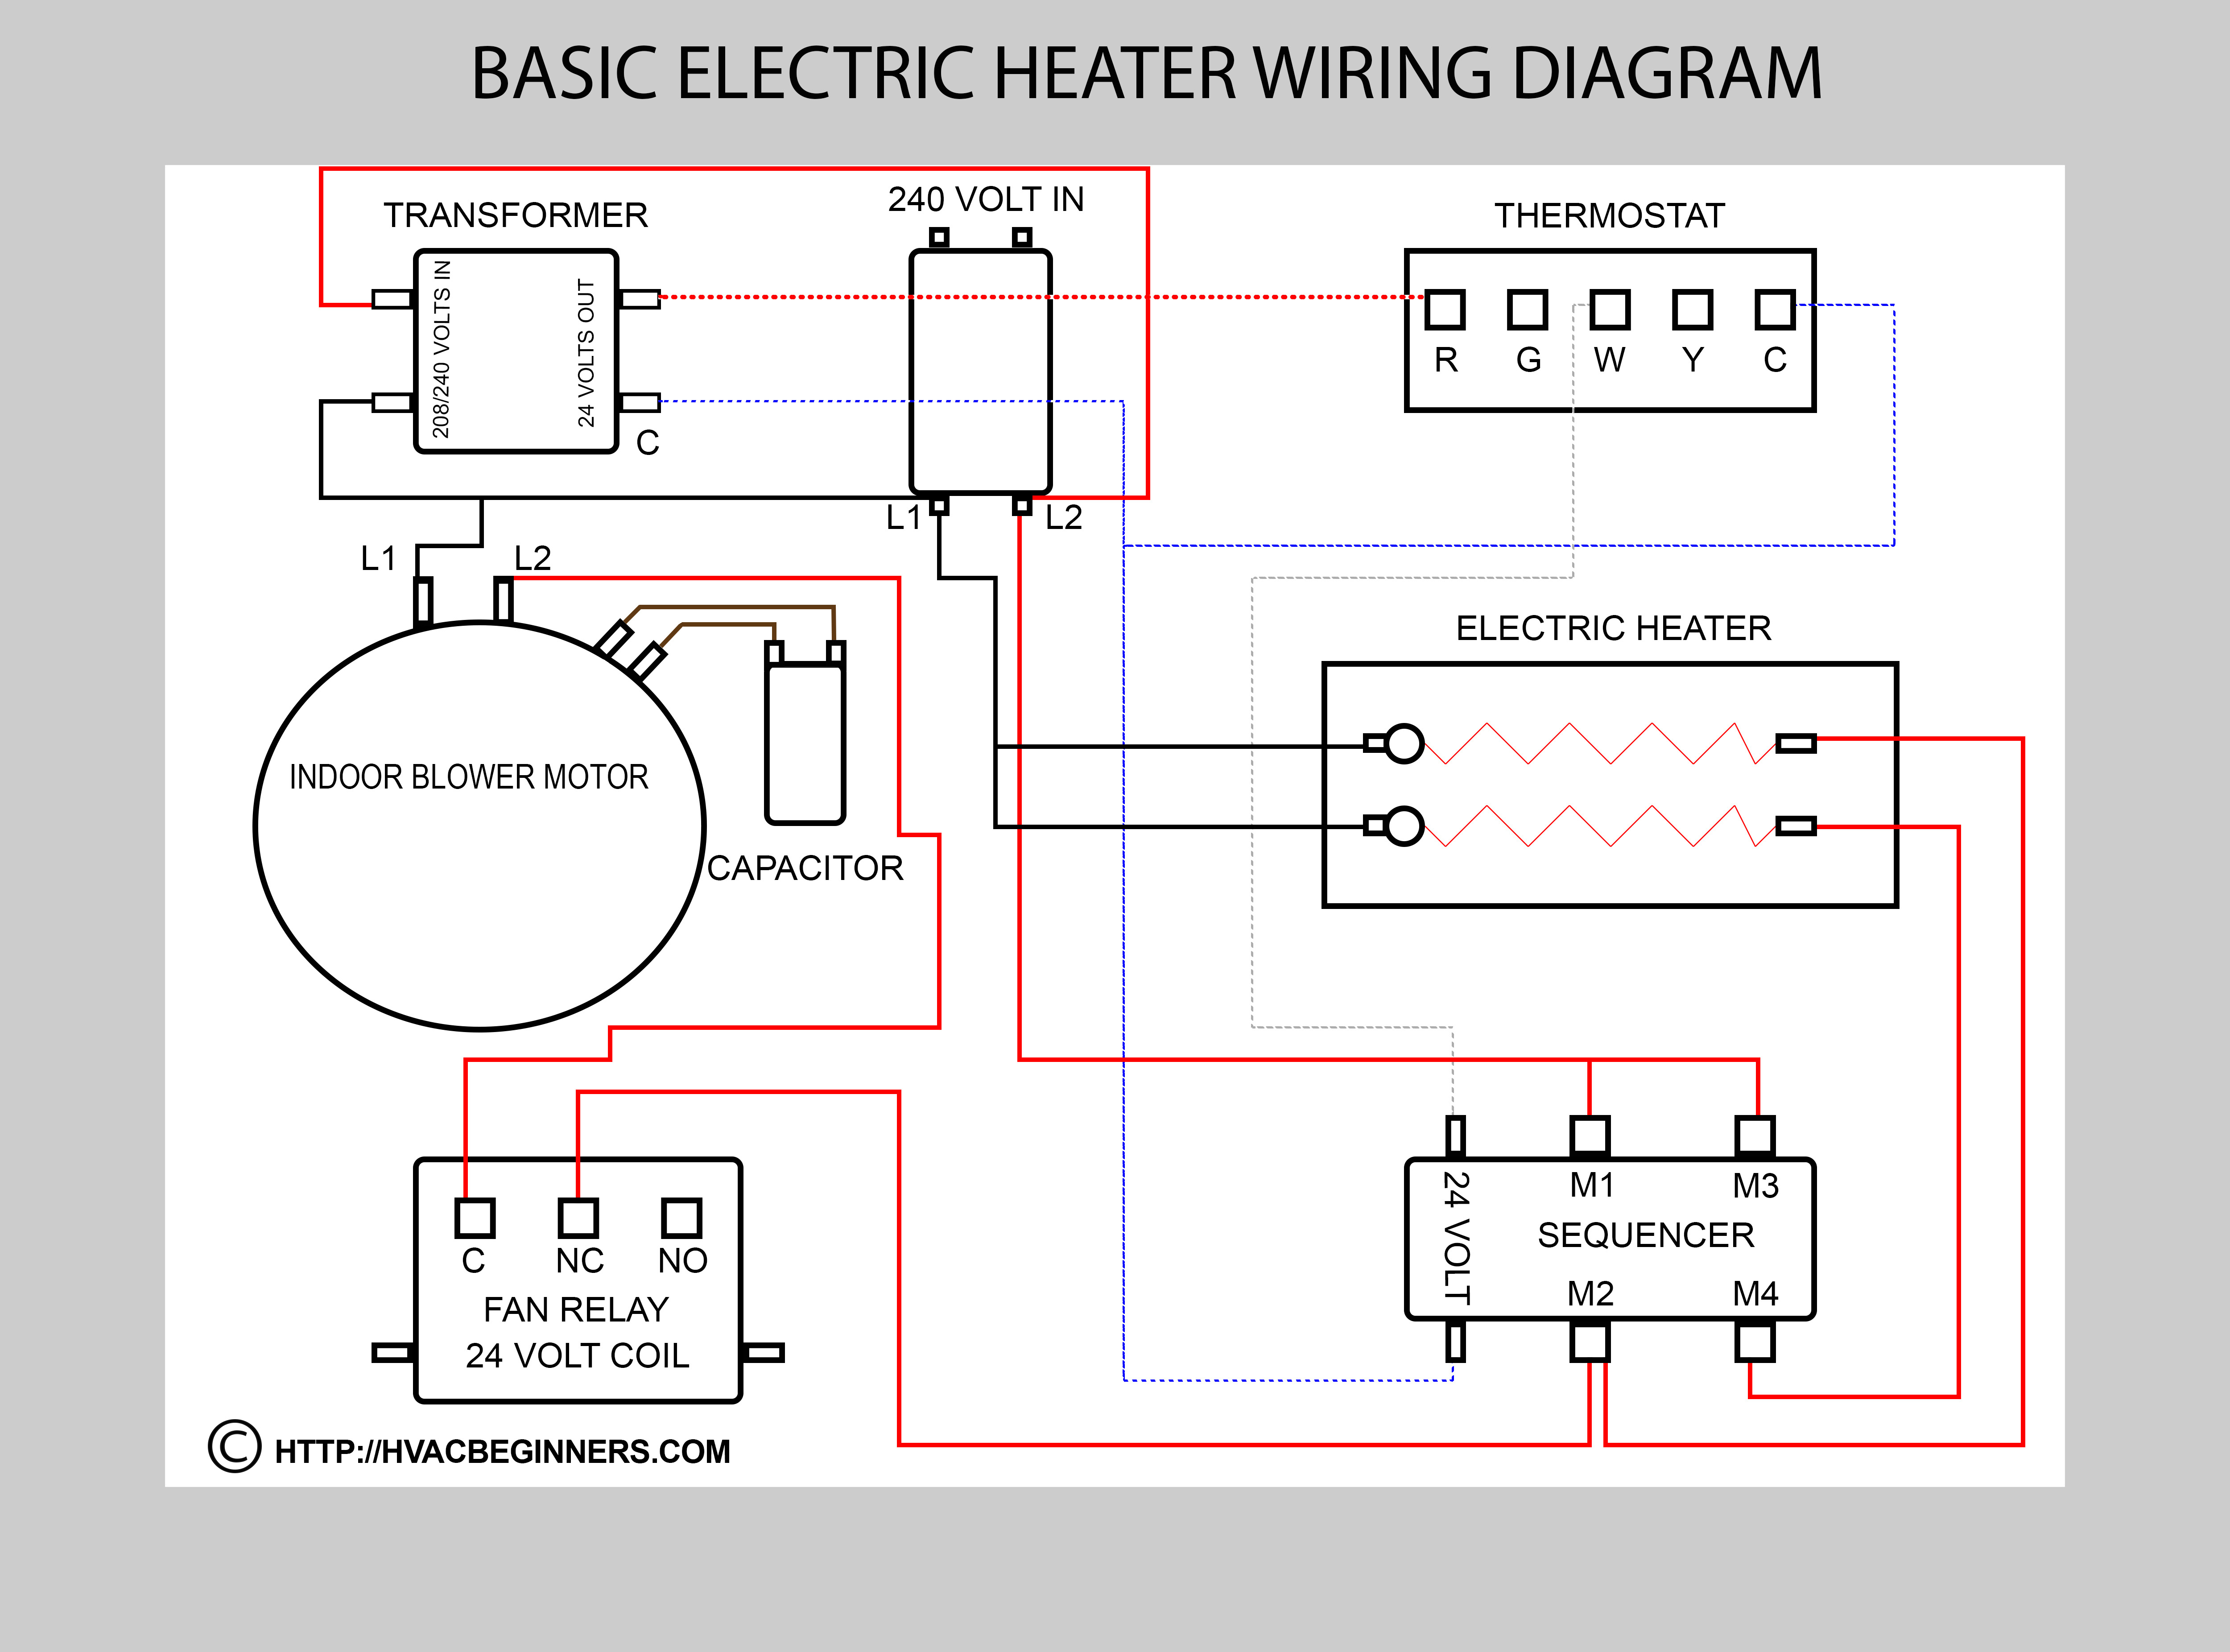 Hvac Training On Electric Heaters - Hvac Training For Beginners - Electric Furnace Wiring Diagram Sequencer